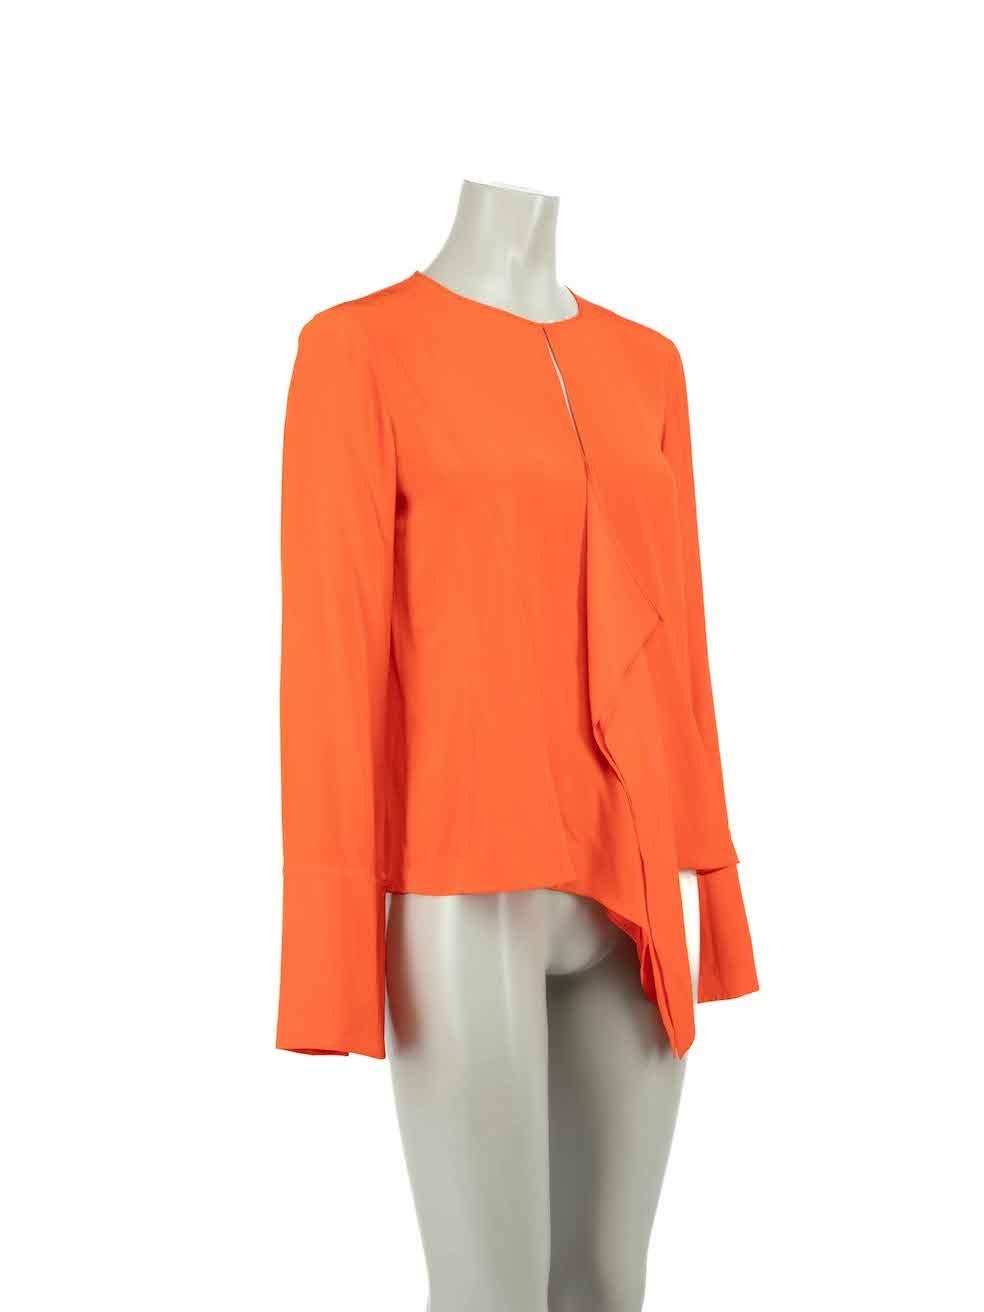 CONDITION is Very good. Hardly any visible wear to blouse is evident on this used Emilio Pucci designer resale item.
 
 
 
 Details
 
 
 Orange
 
 Silk
 
 Blouse
 
 Drape detail
 
 Long sleeves
 
 Round neck
 
 Front keyhole
 
 Back zip and hook